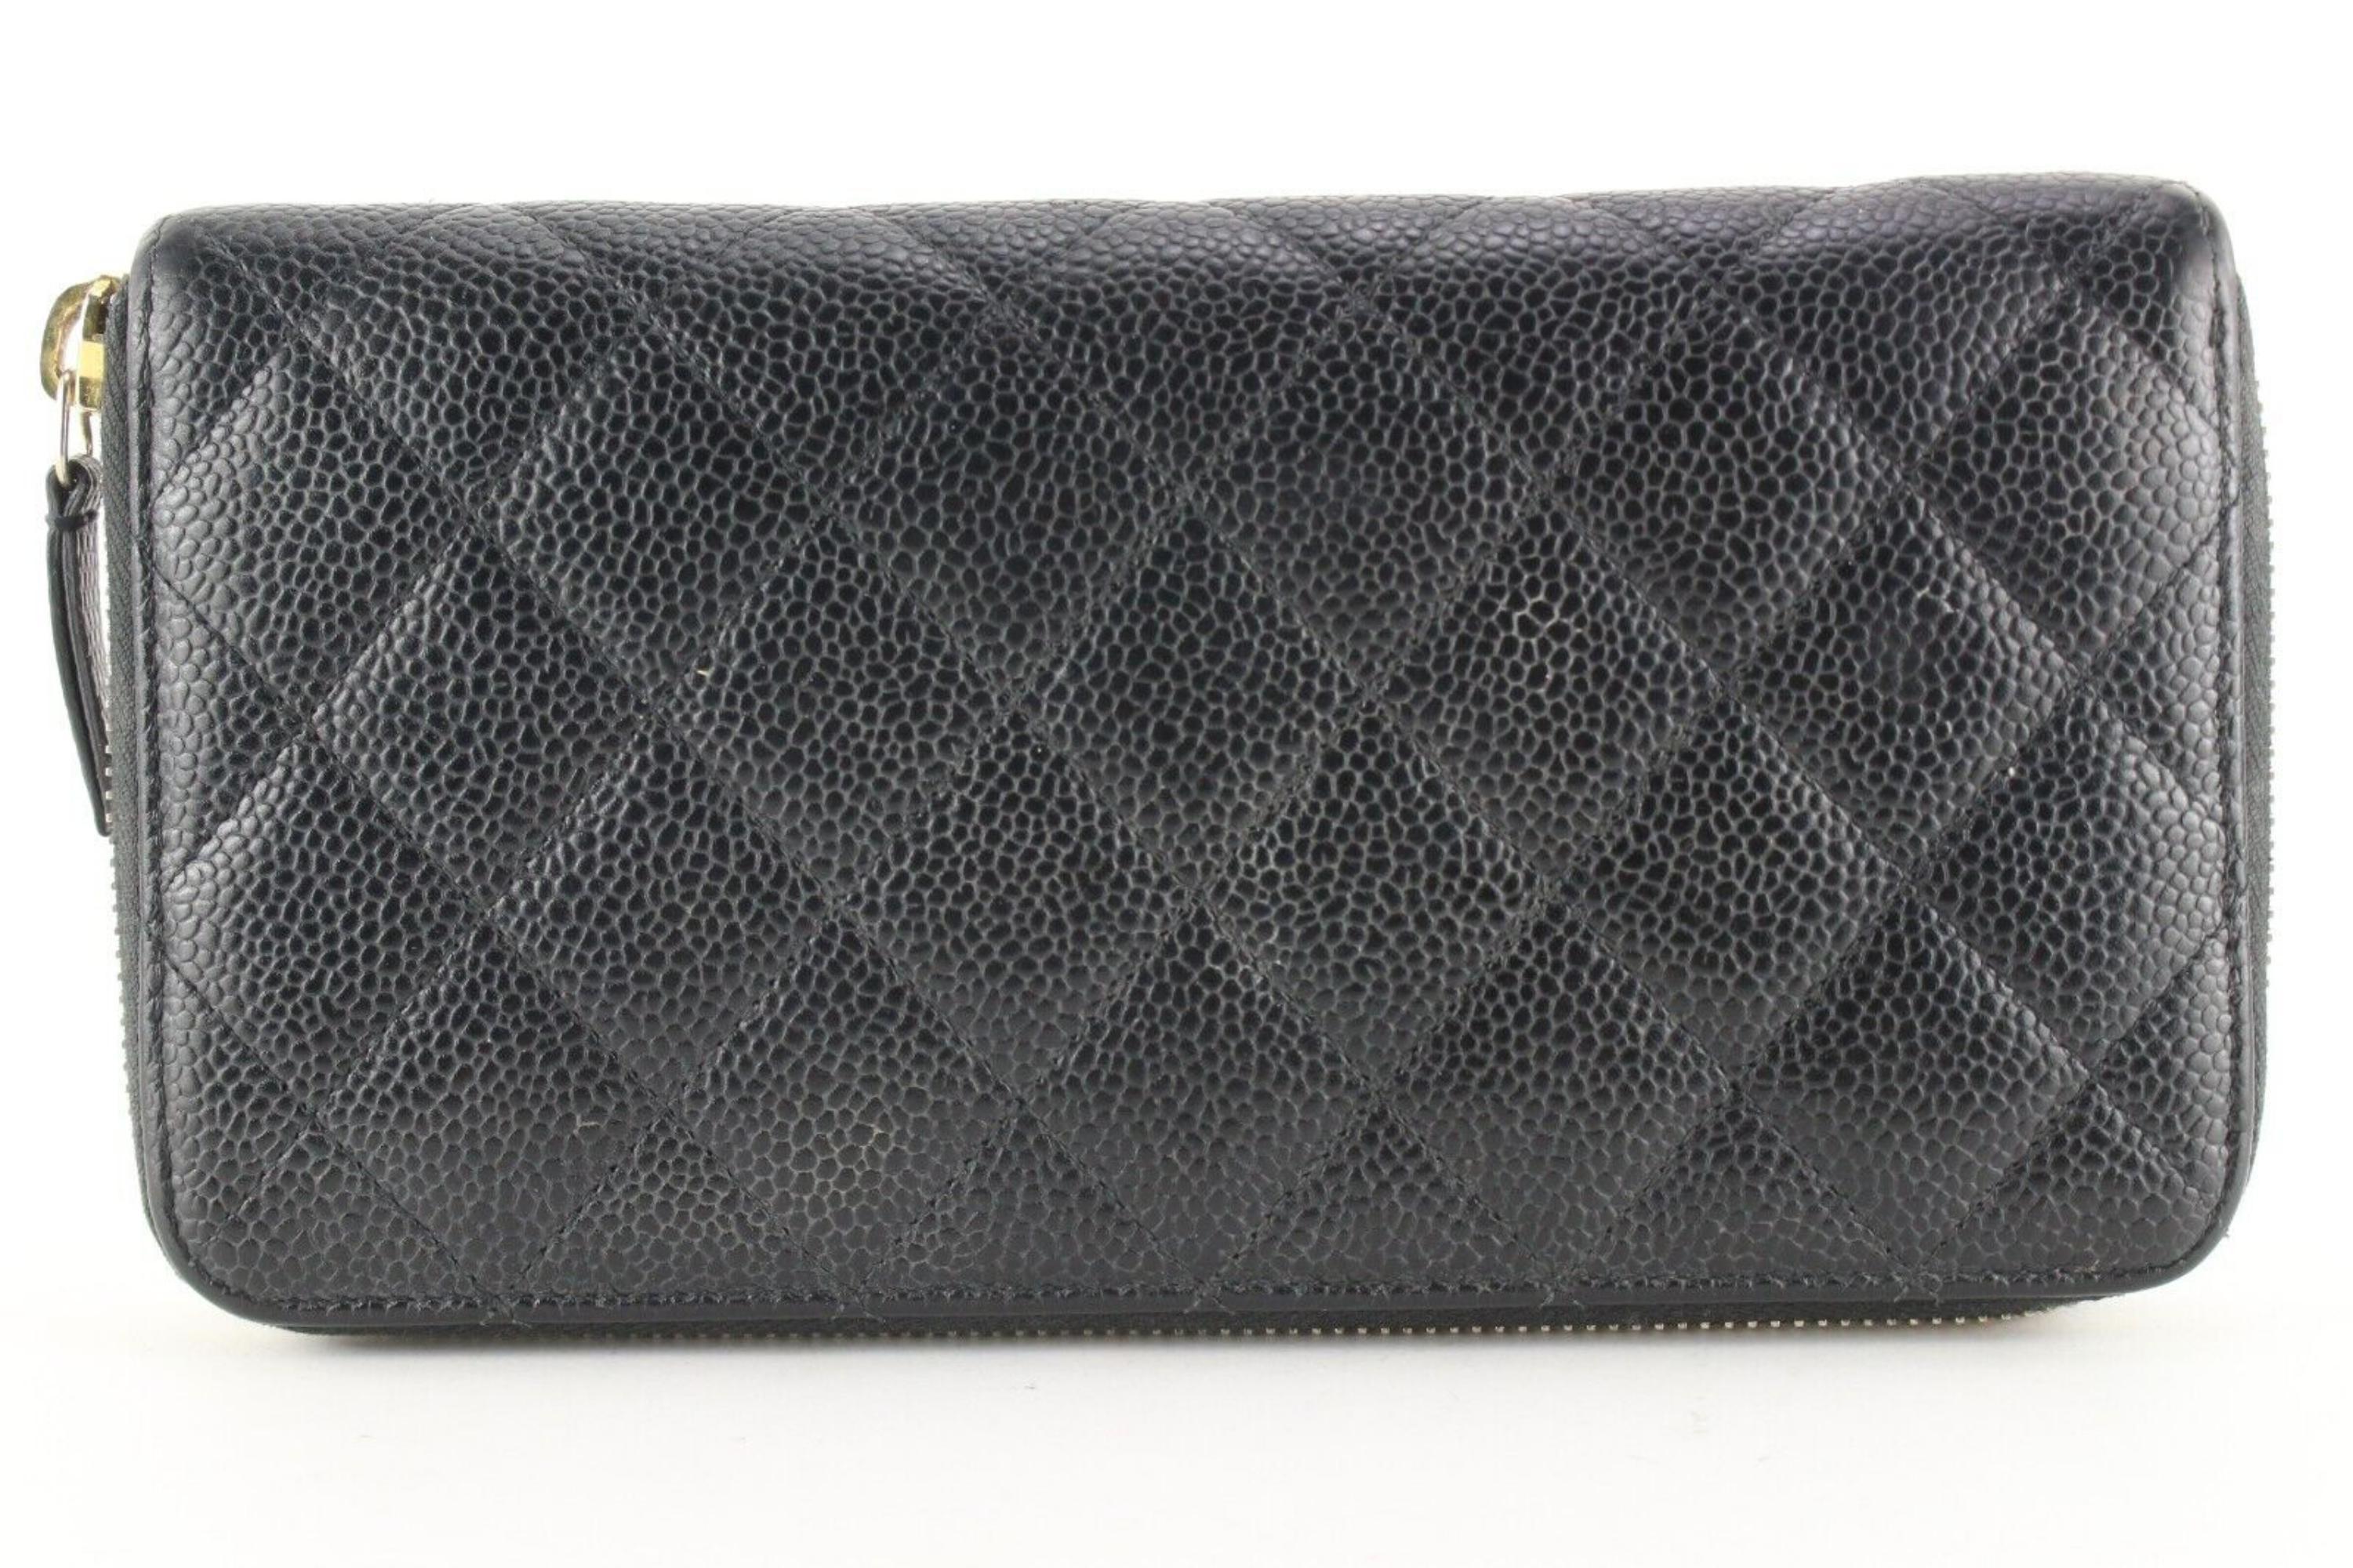 Chanel Black Caviar Quilted L-Gusset Zip Around Continental Wallet 2CC0123 1